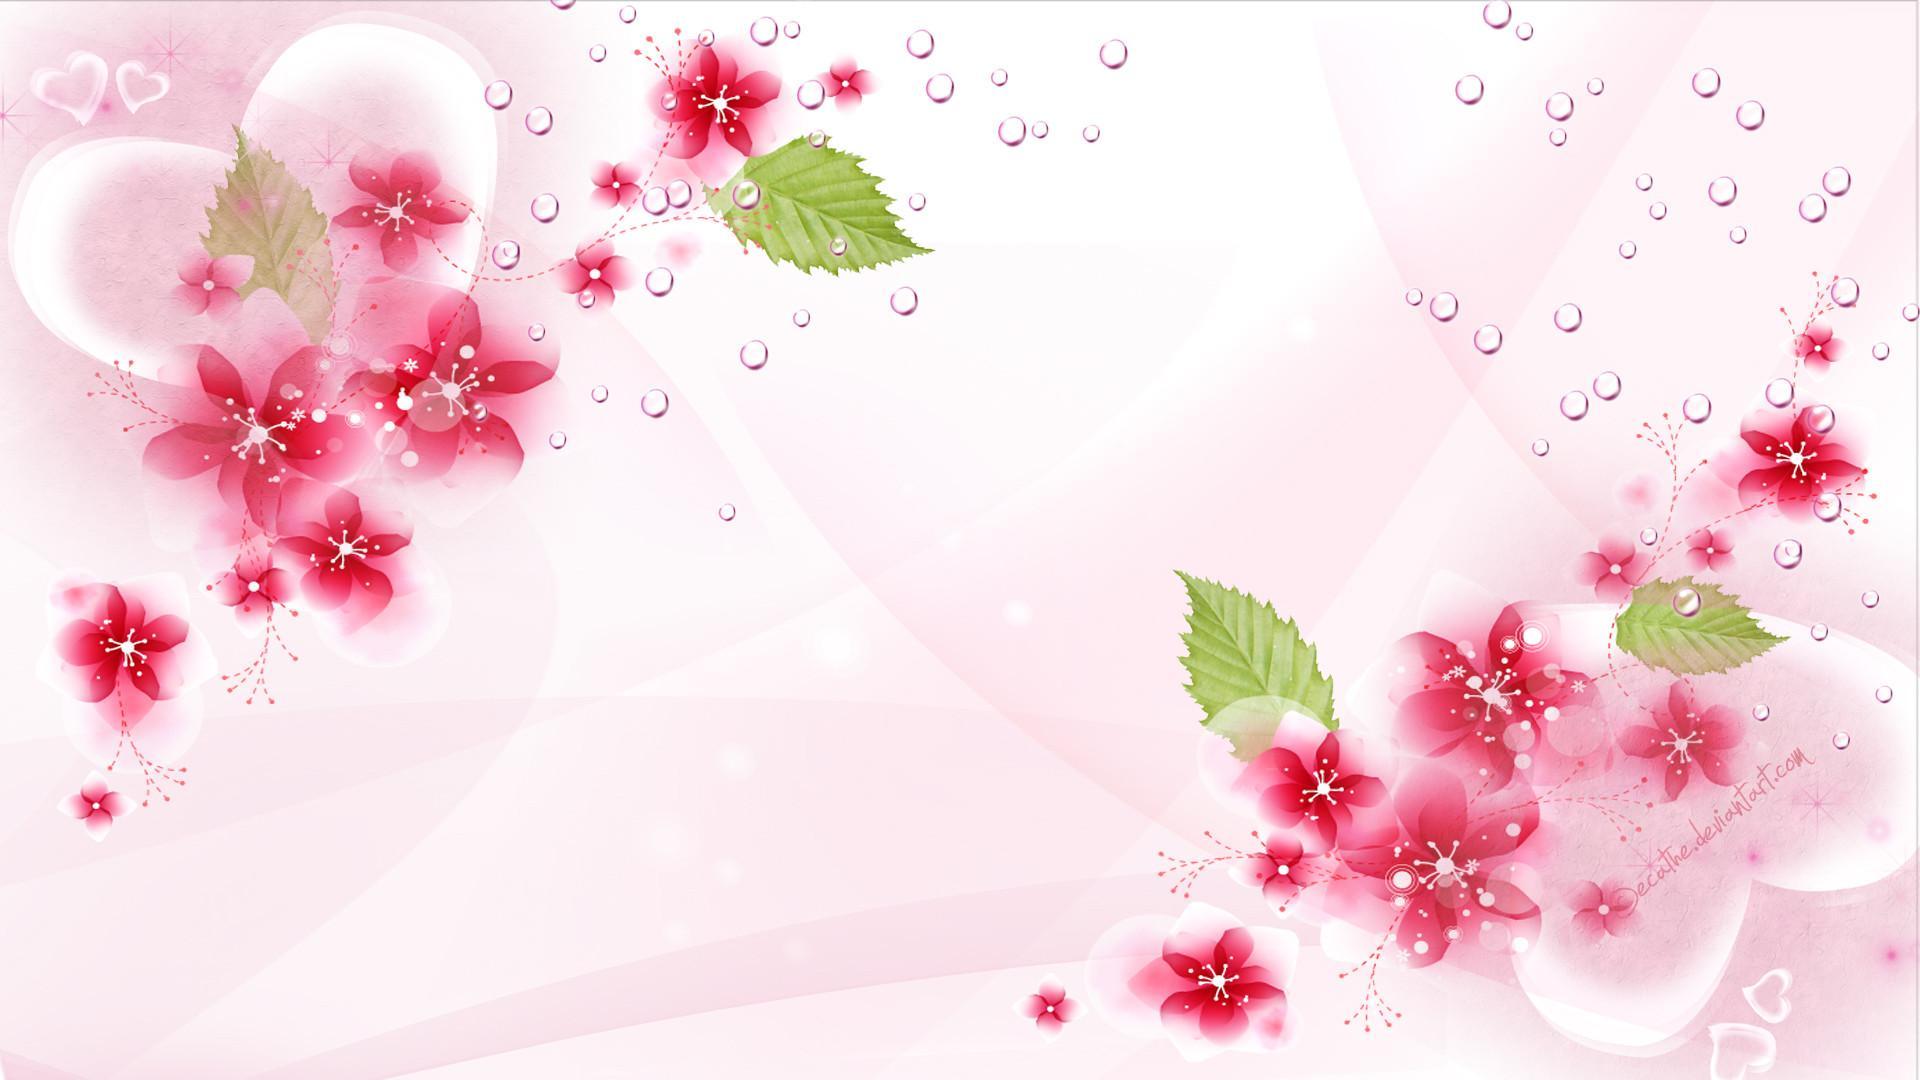 Download Background Wallpaper Flowers High Resolution Background